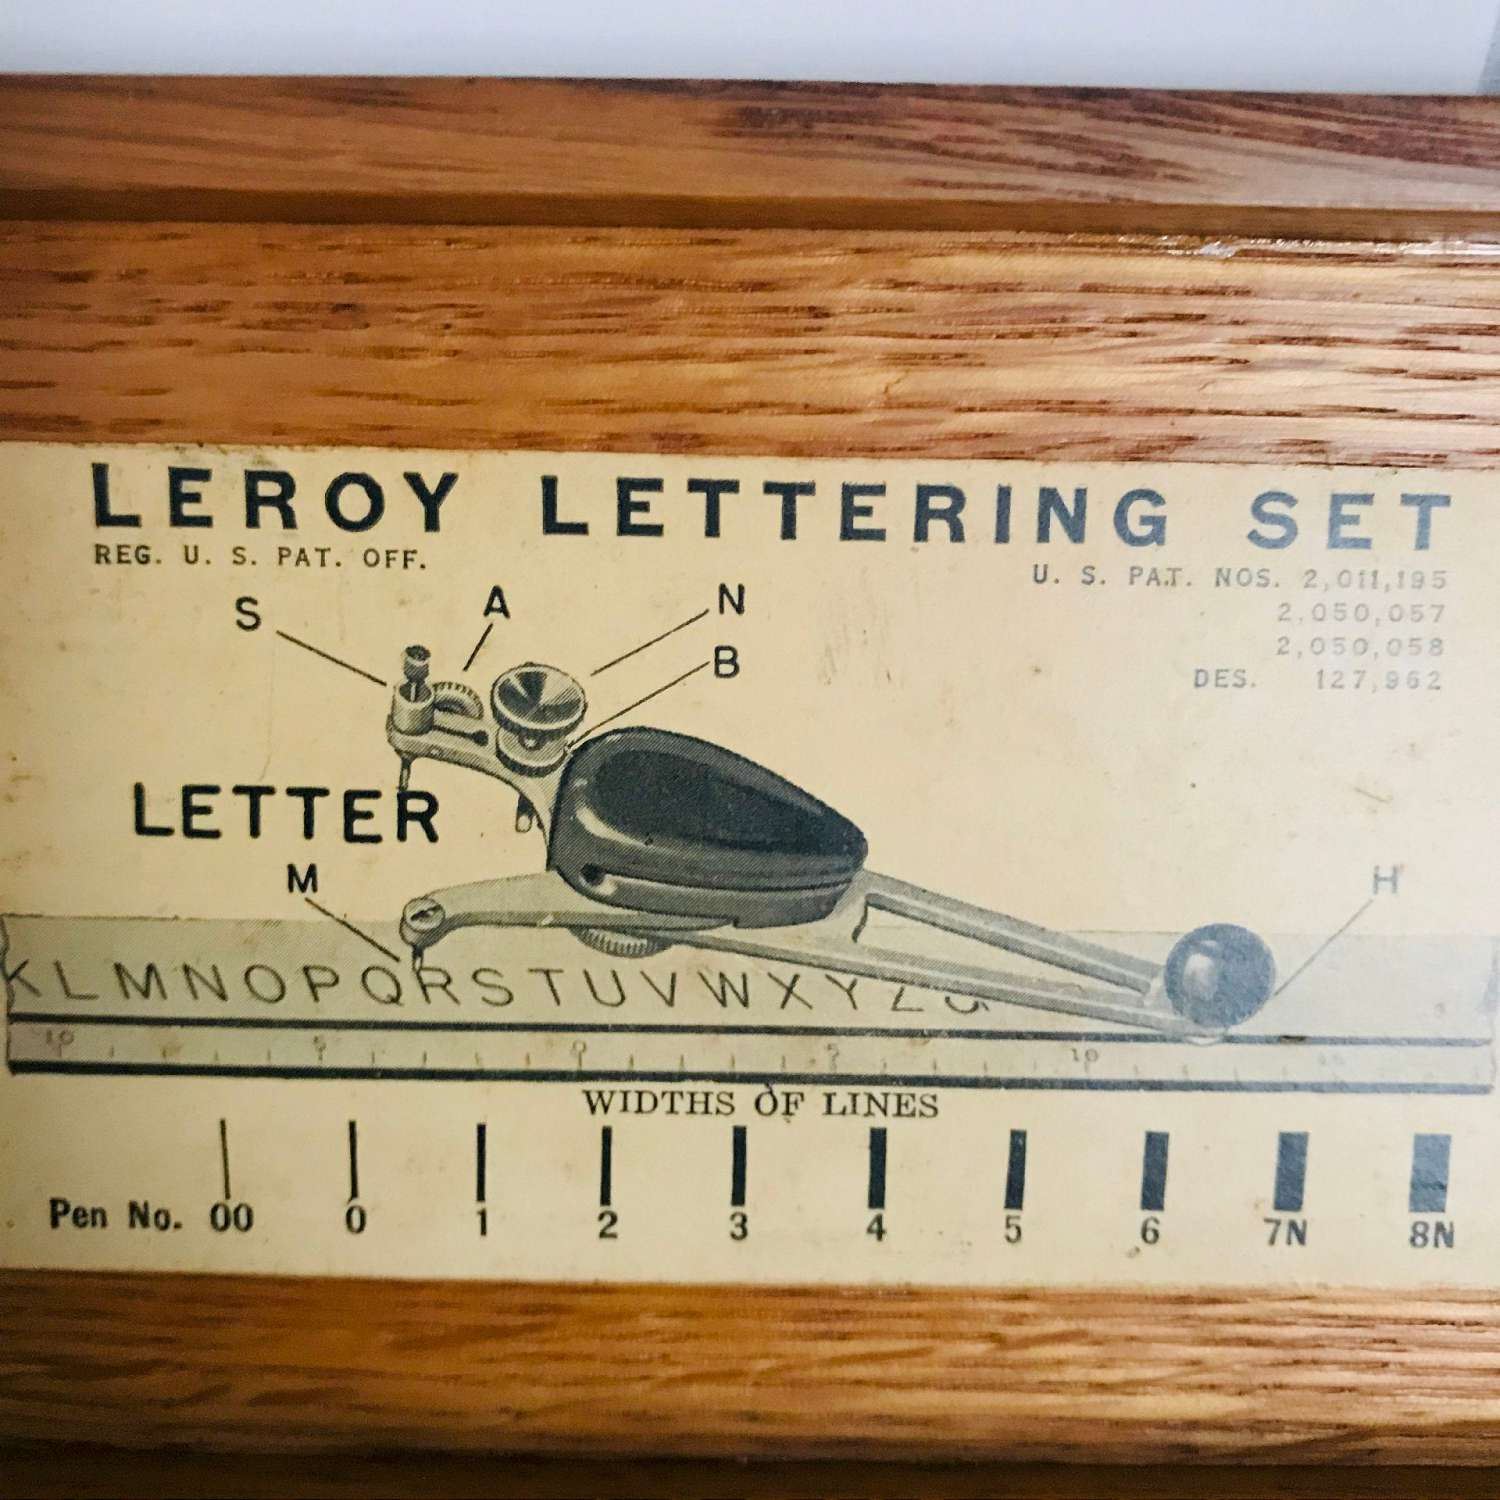 Vintage Lettering Kit Leroy Lettering Set Keuffel & Esser New York 1944  template farmhouse office collectible display – Carol's True Vintage and  Antiques